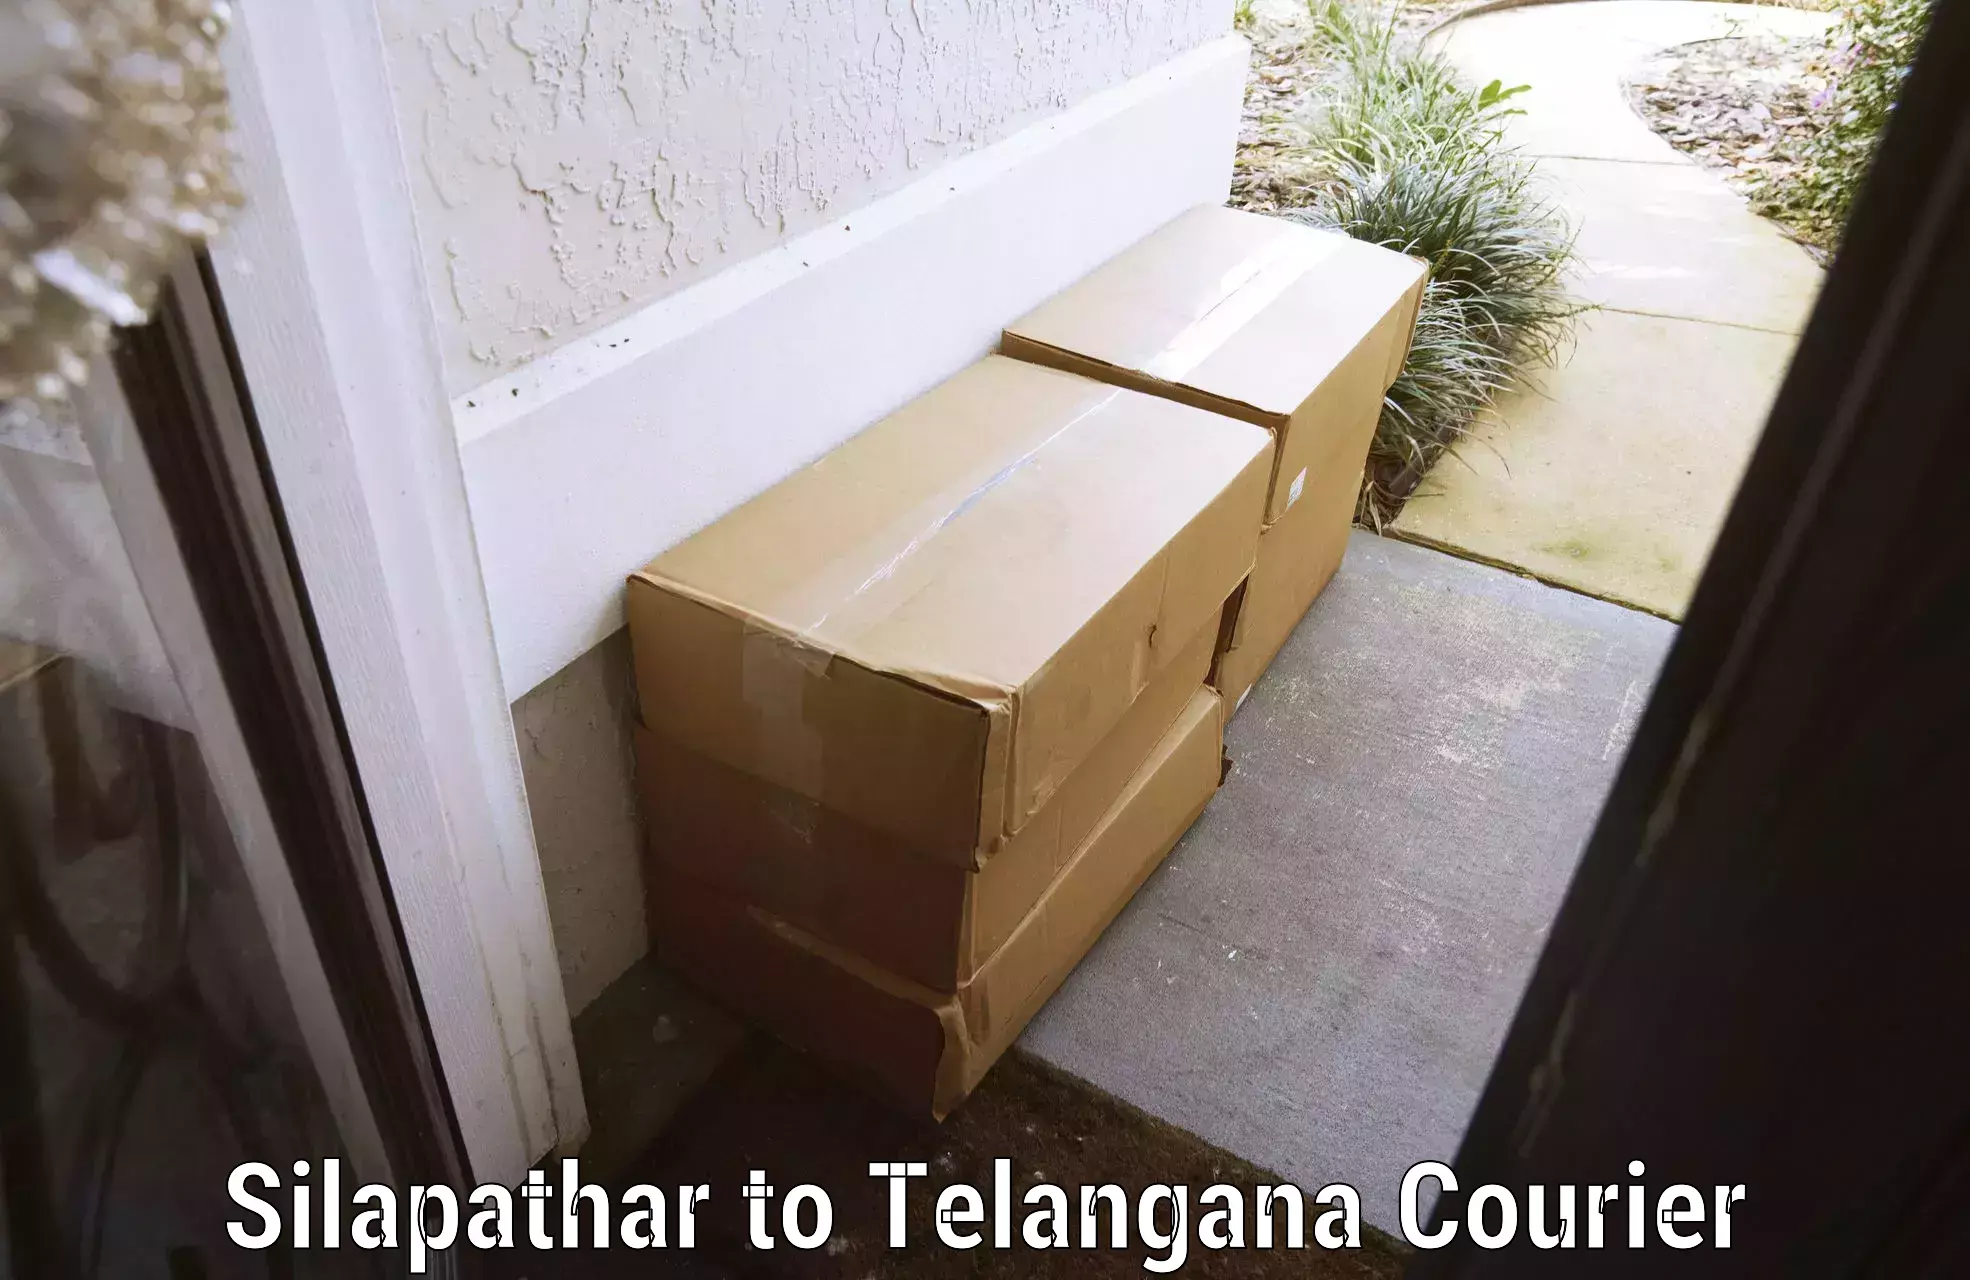 Luggage delivery system in Silapathar to Sathupally